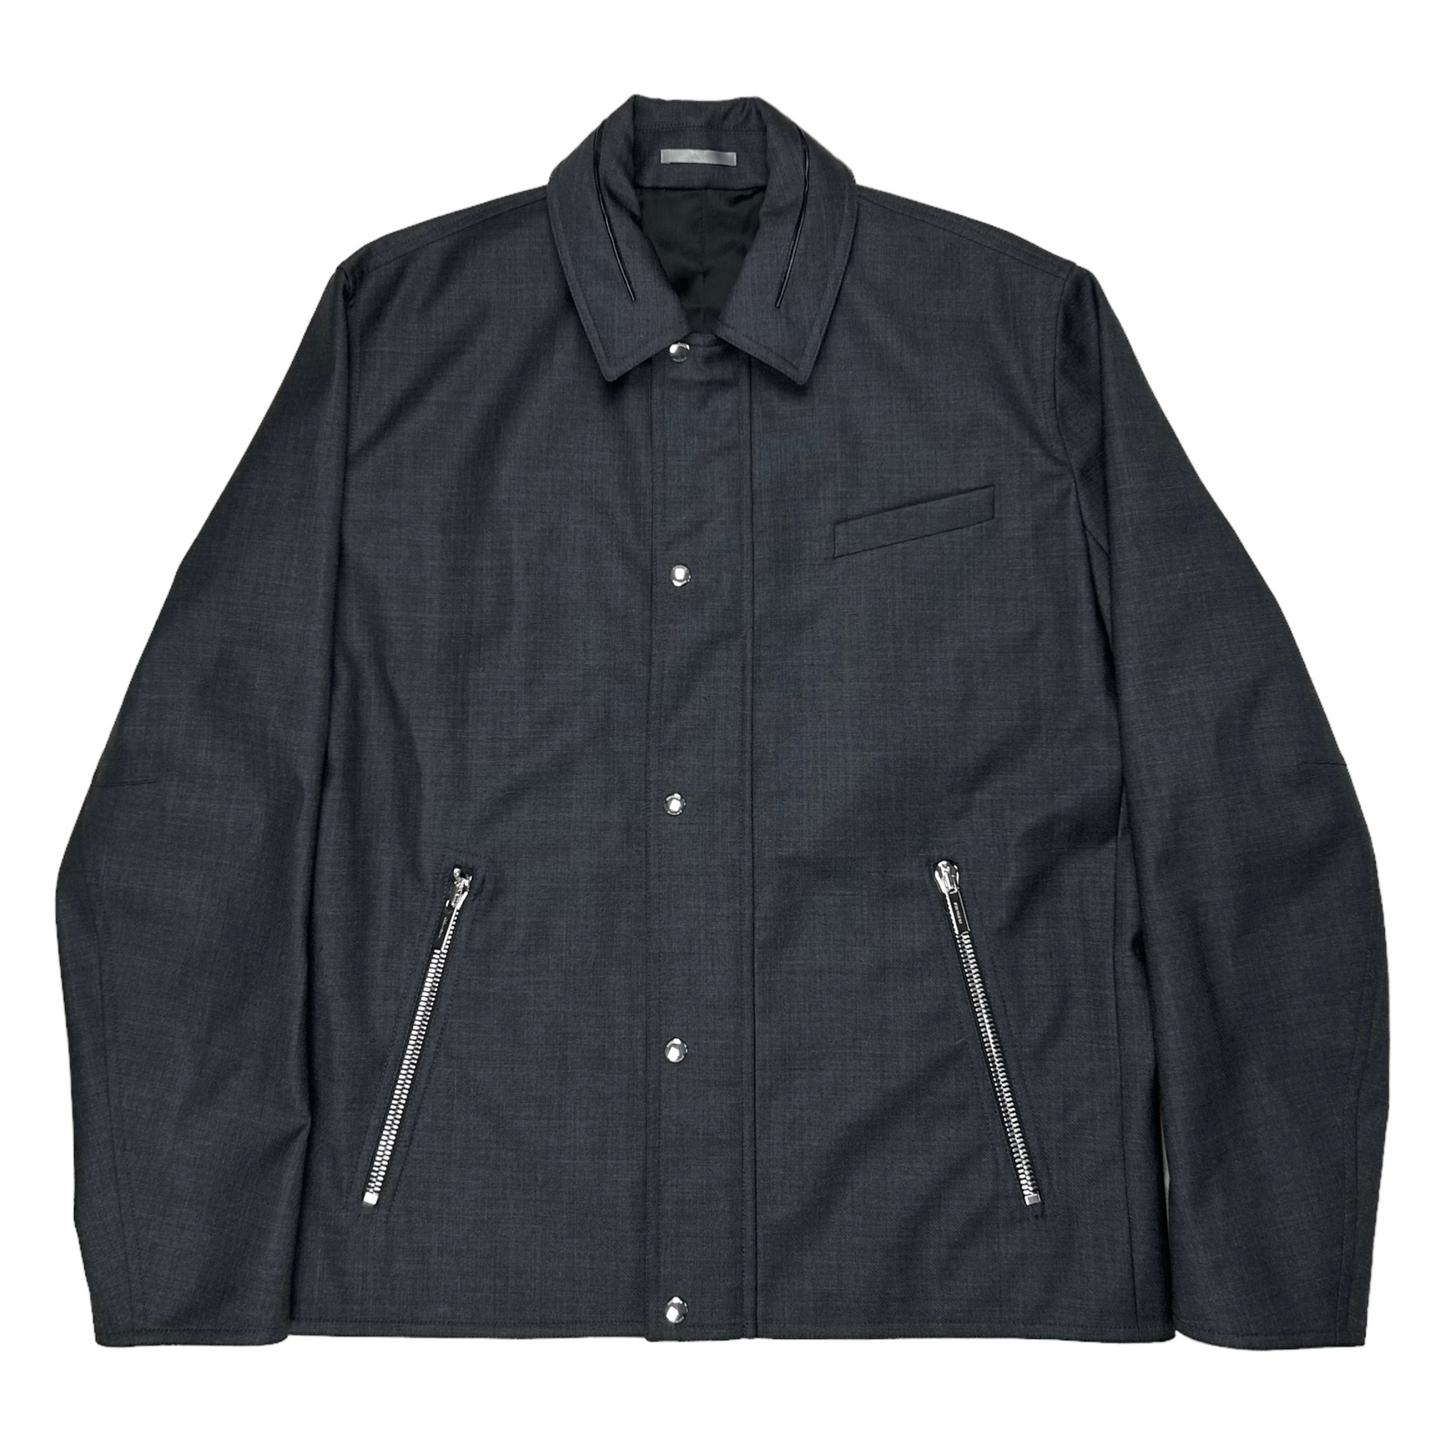 Dior Homme Snap Button Flap Work Jacket - AW19